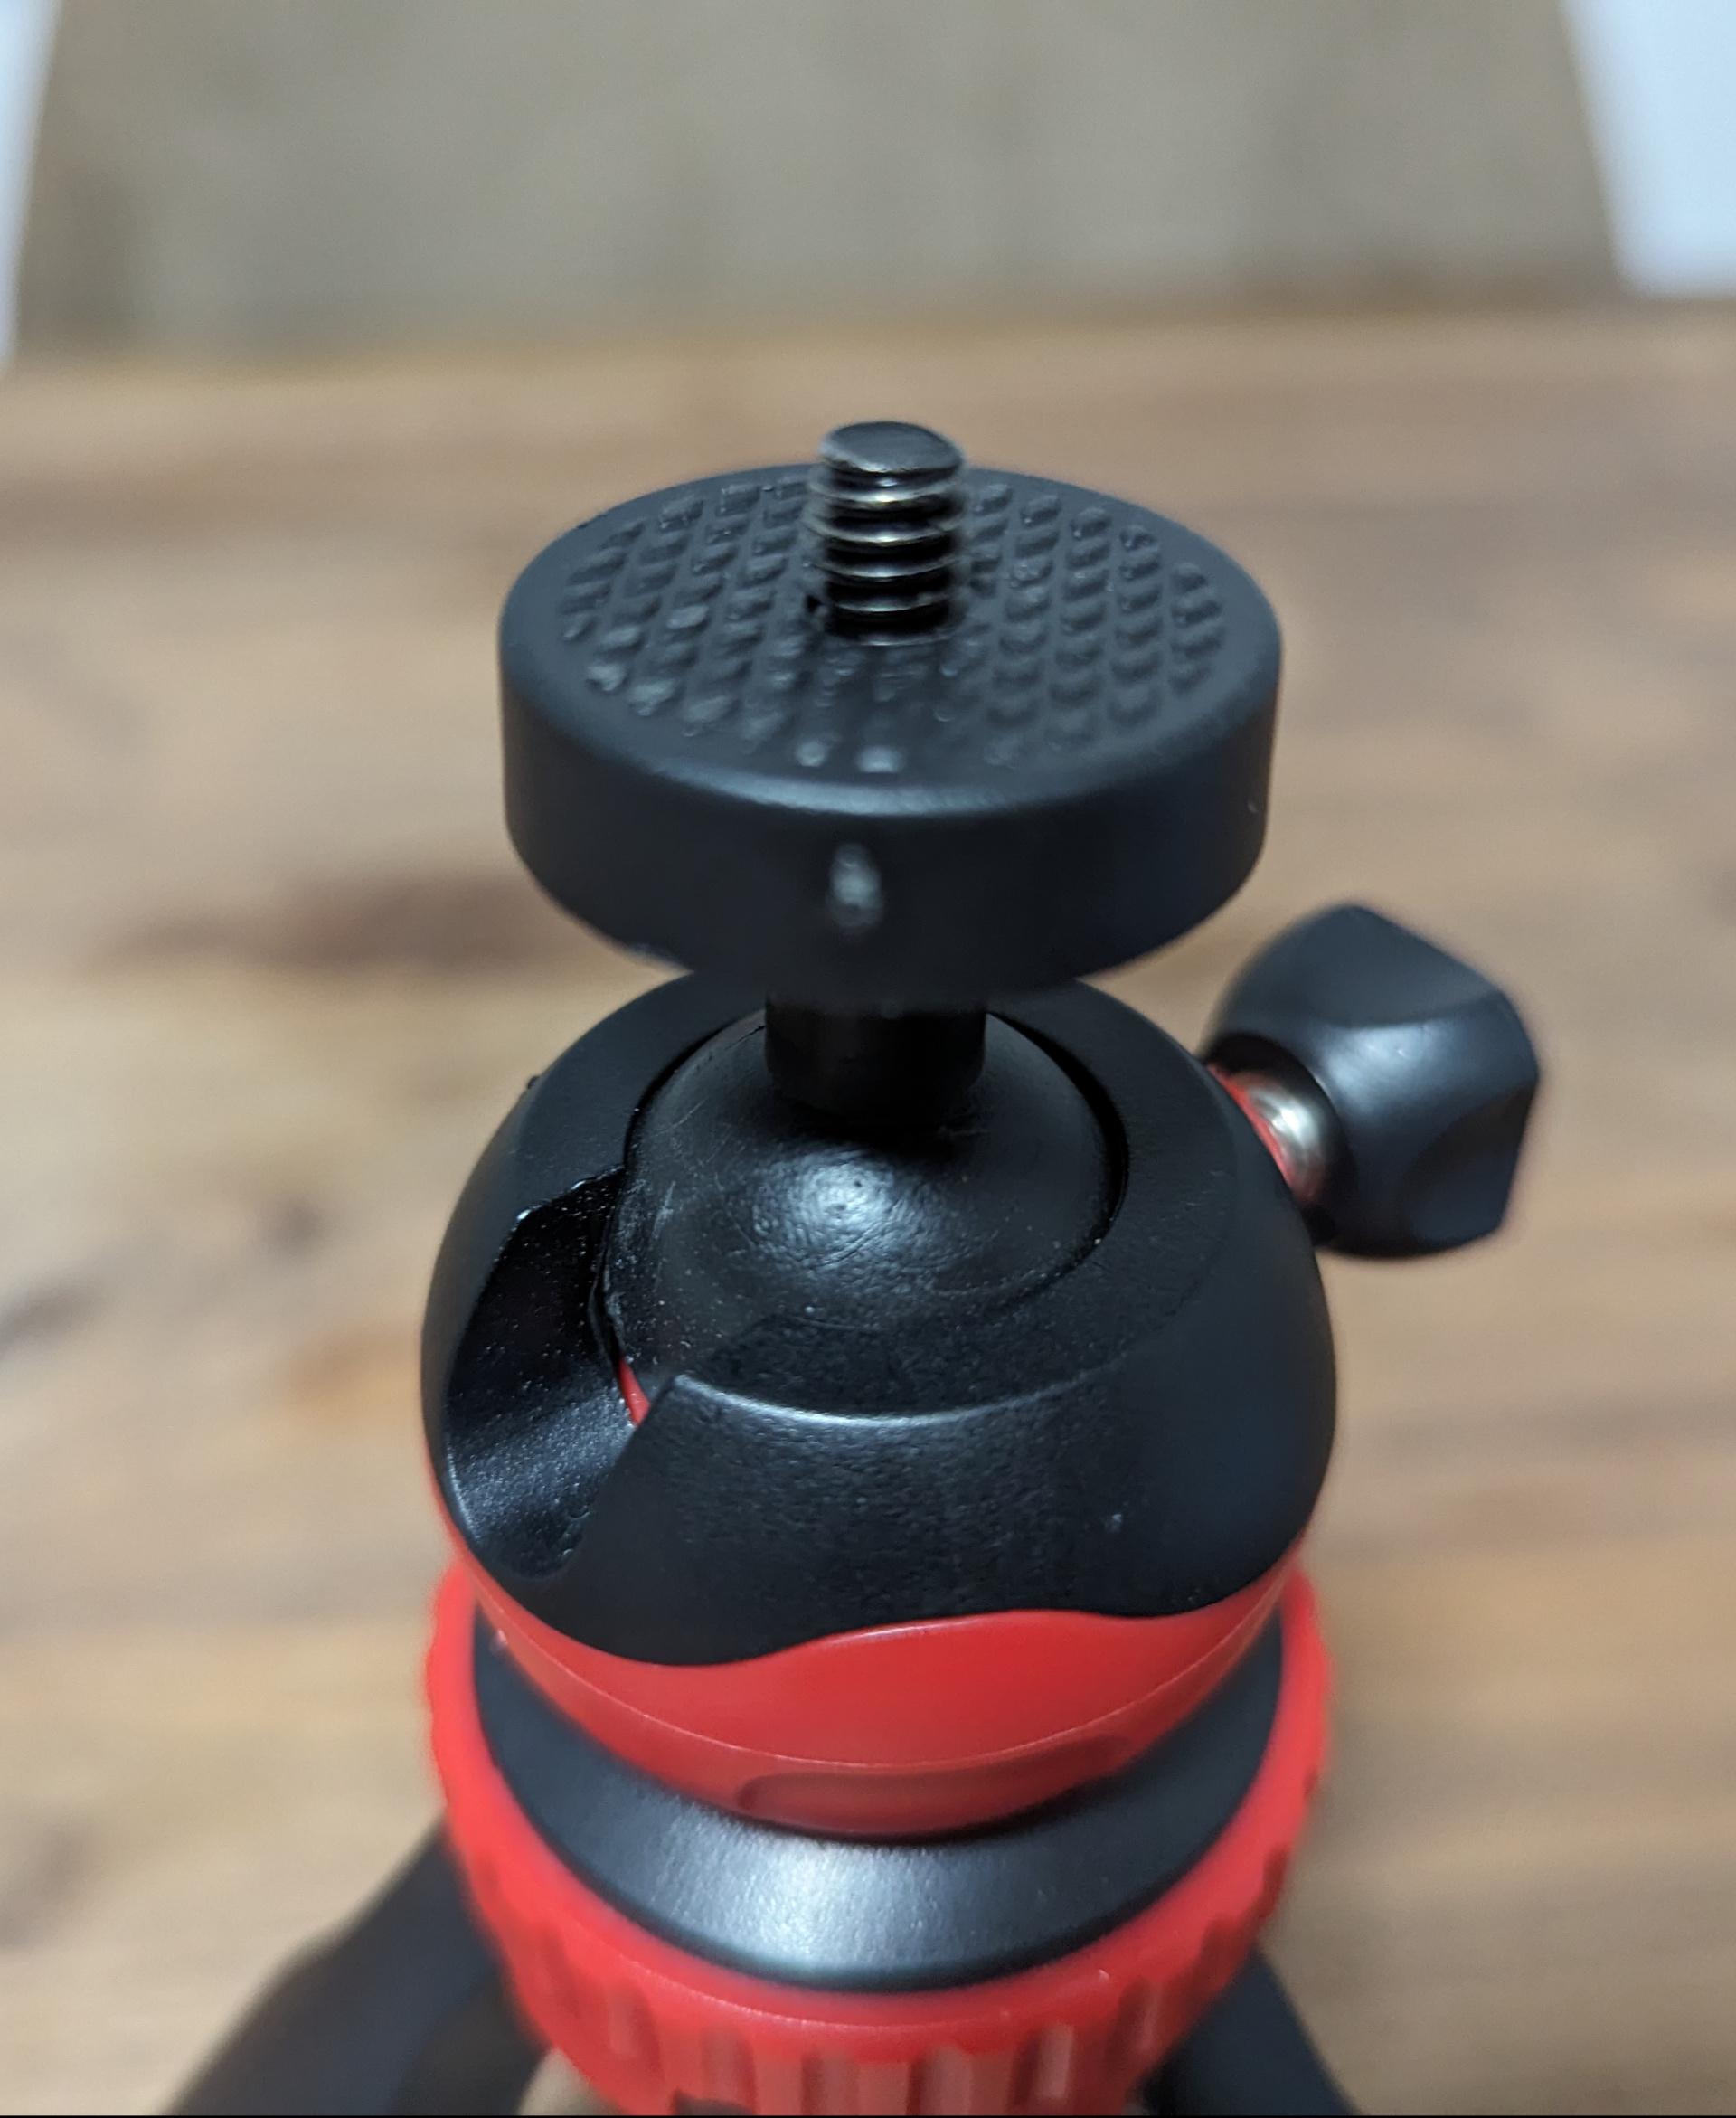 1/4" to Insta360 Mount - This is the tripod I attached my Ace Pro to, using this model. As you can see, it has a little plastic + rubber disc directly threaded onto the bolt. I removed this disc and turned it upside down to use it as a nut. This plate / disc / nut holds the printed model on the 1/4" bolt.

In my case, I also opted to add an M6 washer to the base of the bolt, underneath the printed model. I did this because the narrow ring of plastic surrounding the 1/4" bolt thread is a bit too narrow and cuts into the printed model a little. If you don't have so much thread exposed, or if you have a more substantial base for the model to be mounted on, you probably don't need a washer. I used M6, but naturally a 1/4" washer is probably more appropriate if you have one. - 3d model